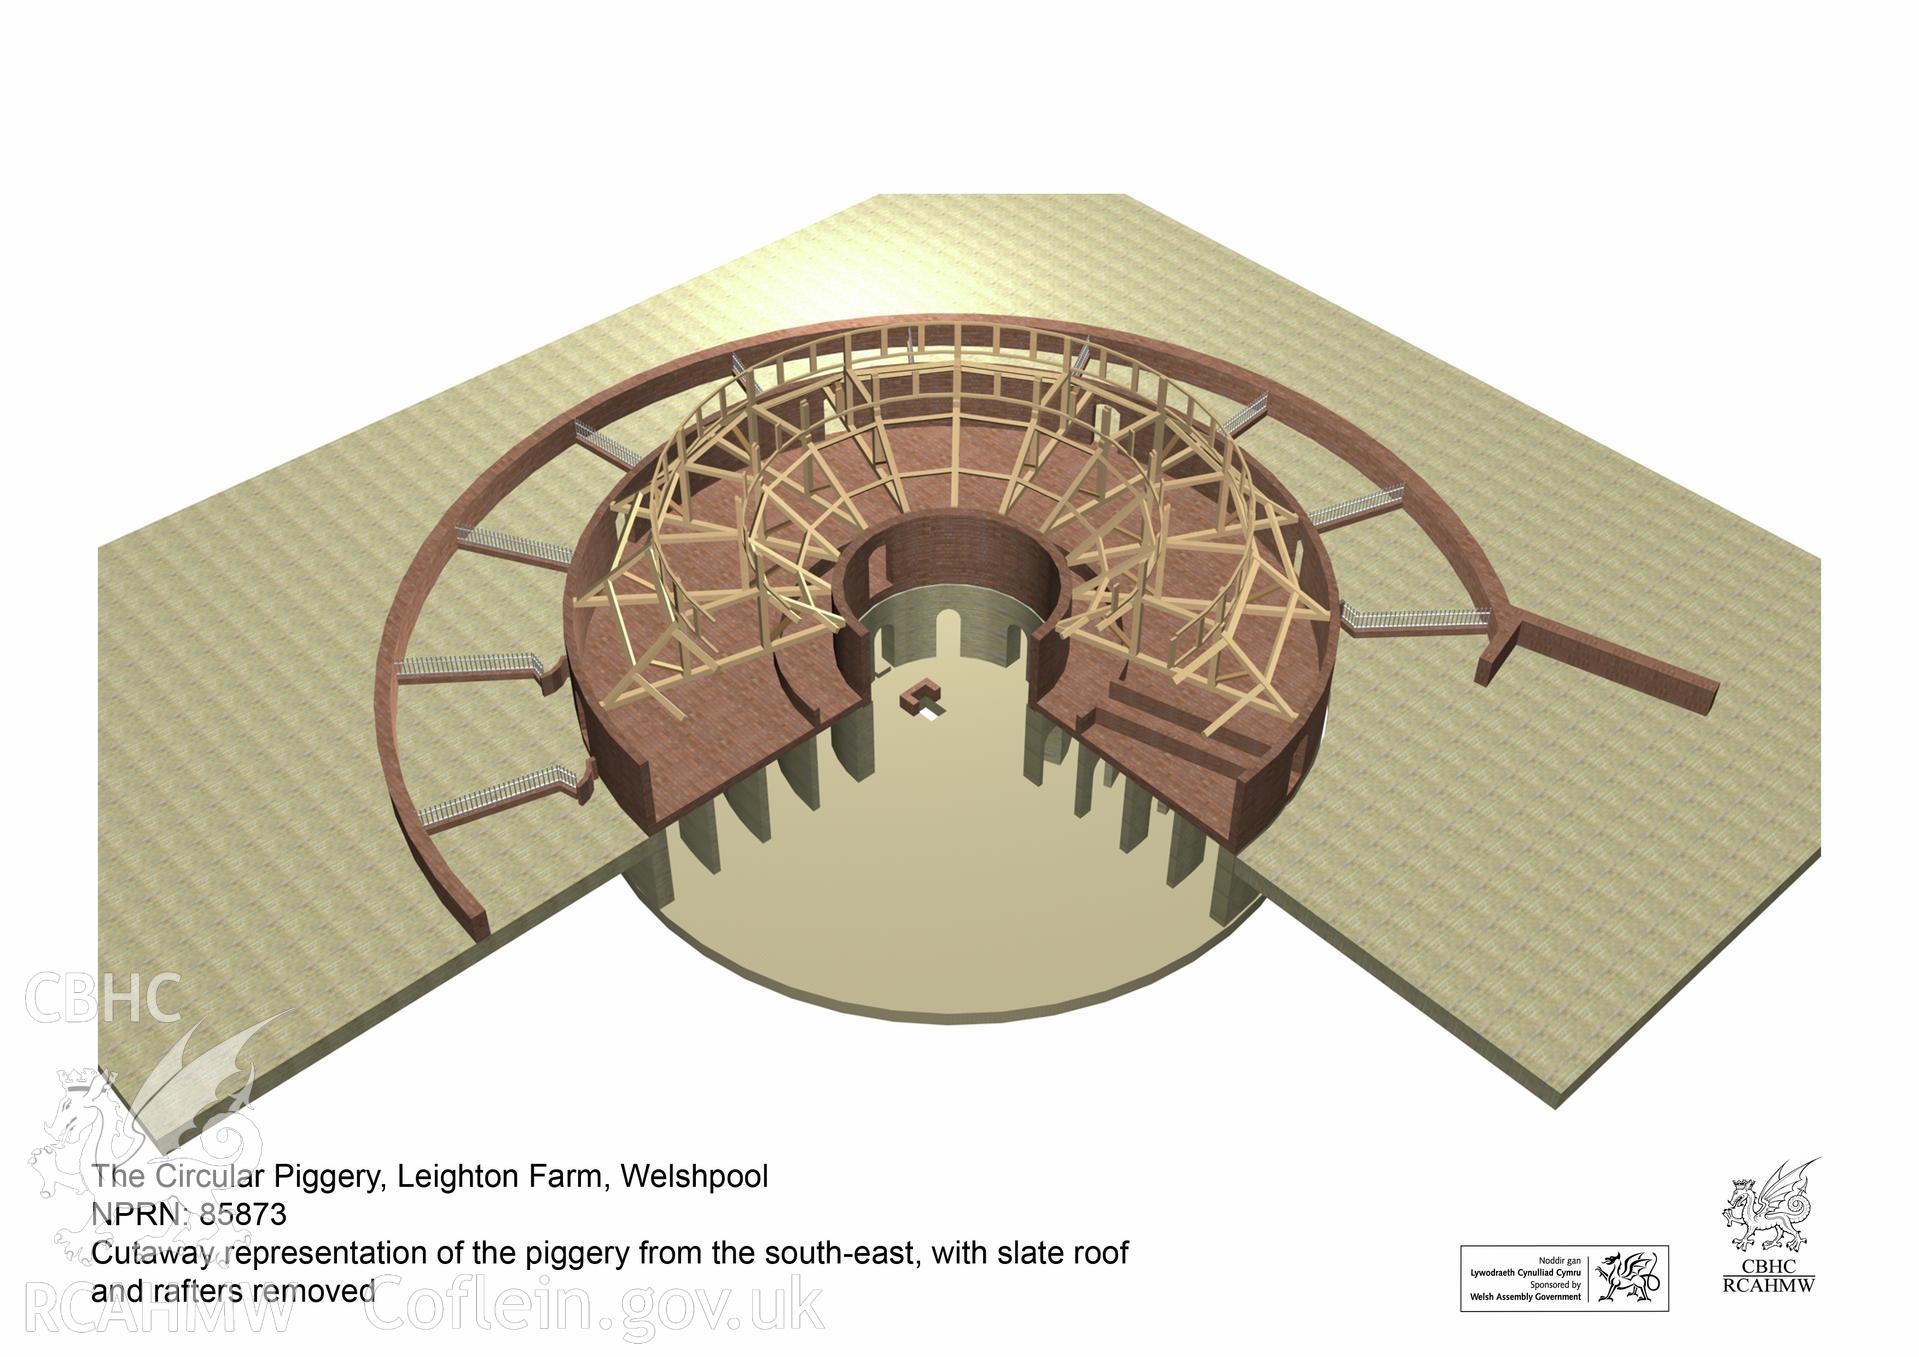 Still taken from a 3D Studio Max model showing the circular piggery in a cutaway view from the south-east, with the slates and rafters removed, from an RCAHMW digital survey of the Circular Piggery, Leighton Farm, Welshpool. Carried out by Susan Fielding, 11/08/2008.